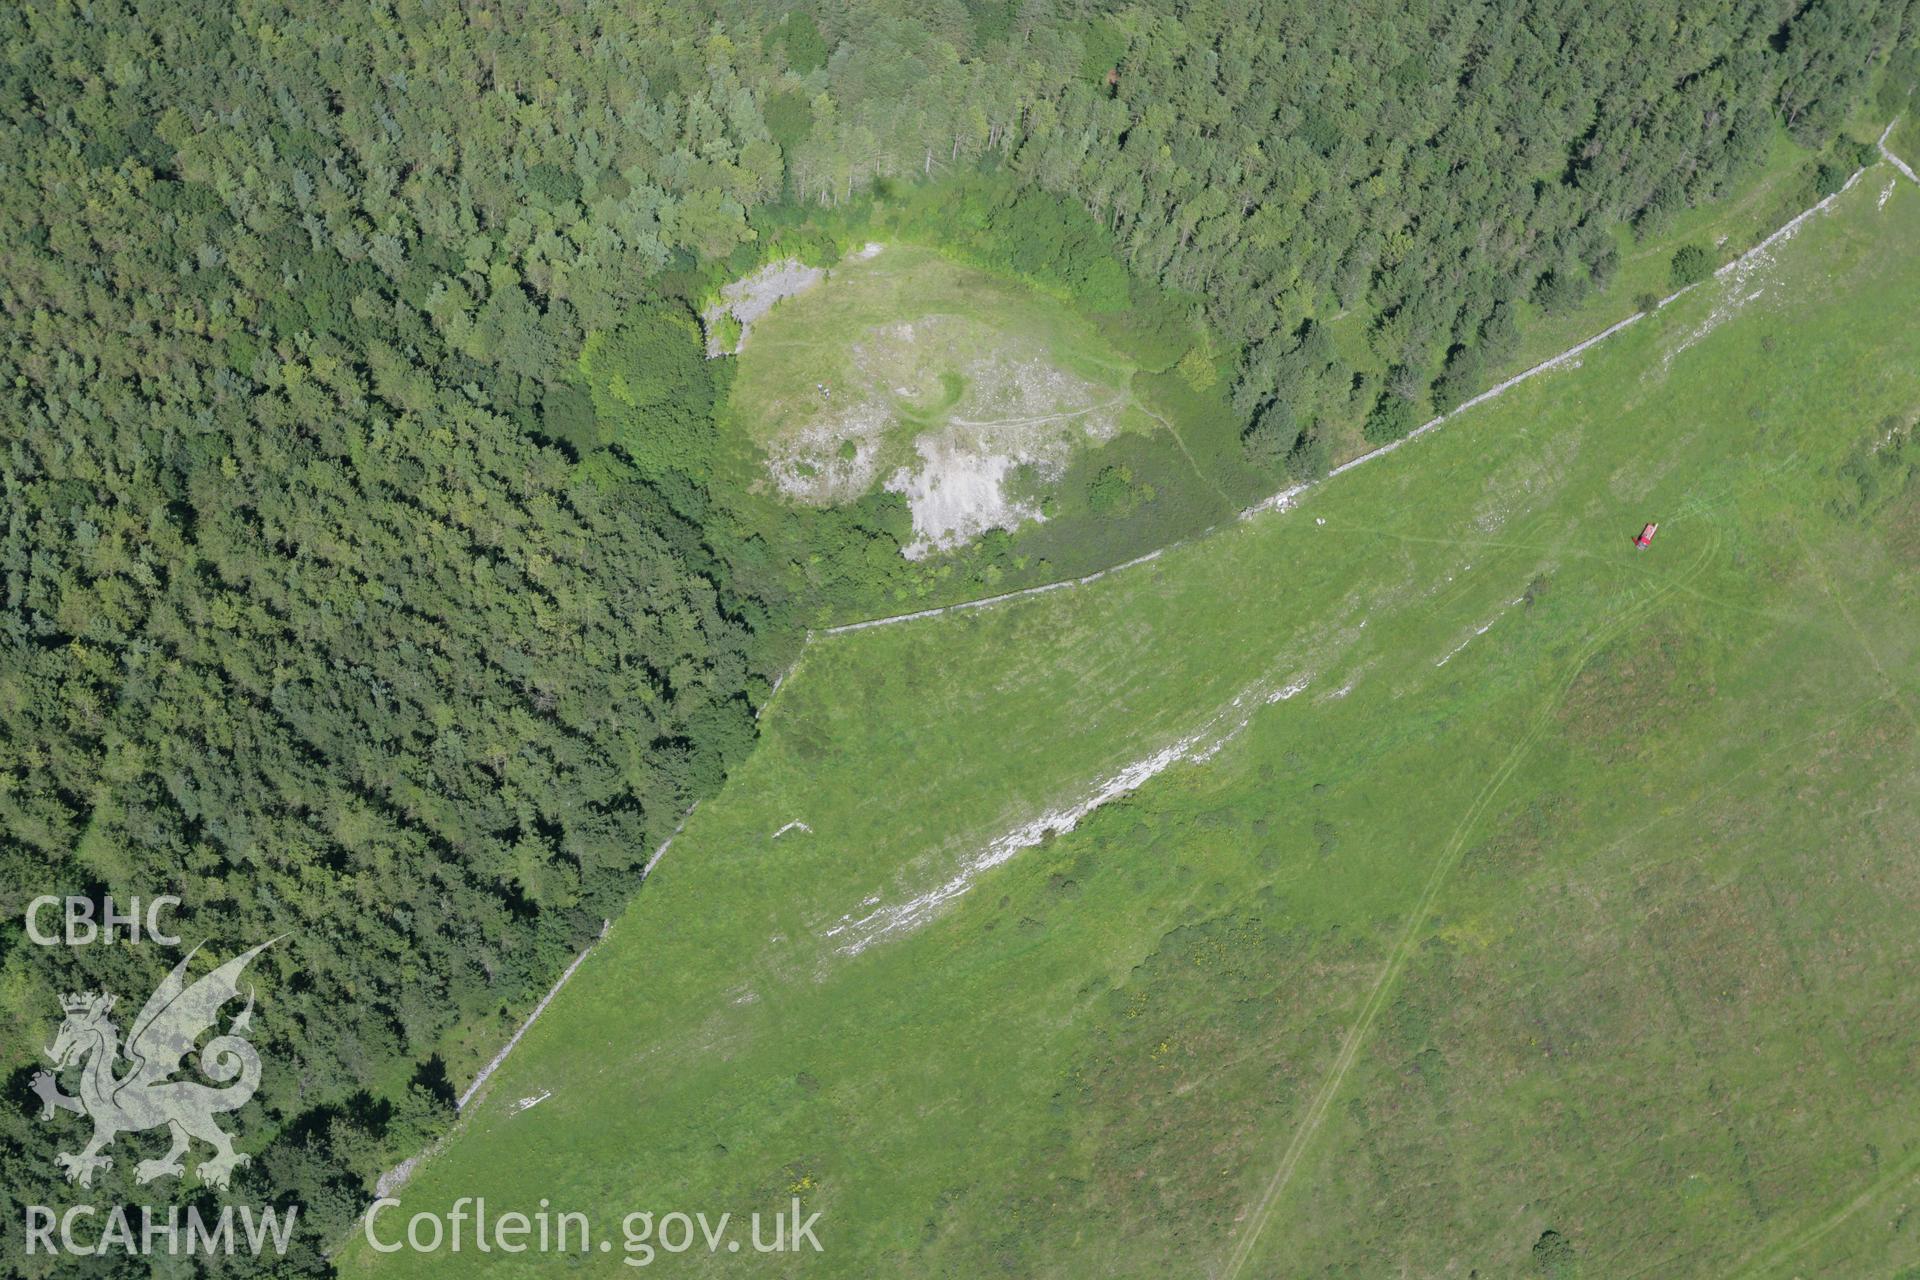 RCAHMW colour oblique aerial photograph of Gop Cave. Taken on 31 July 2007 by Toby Driver